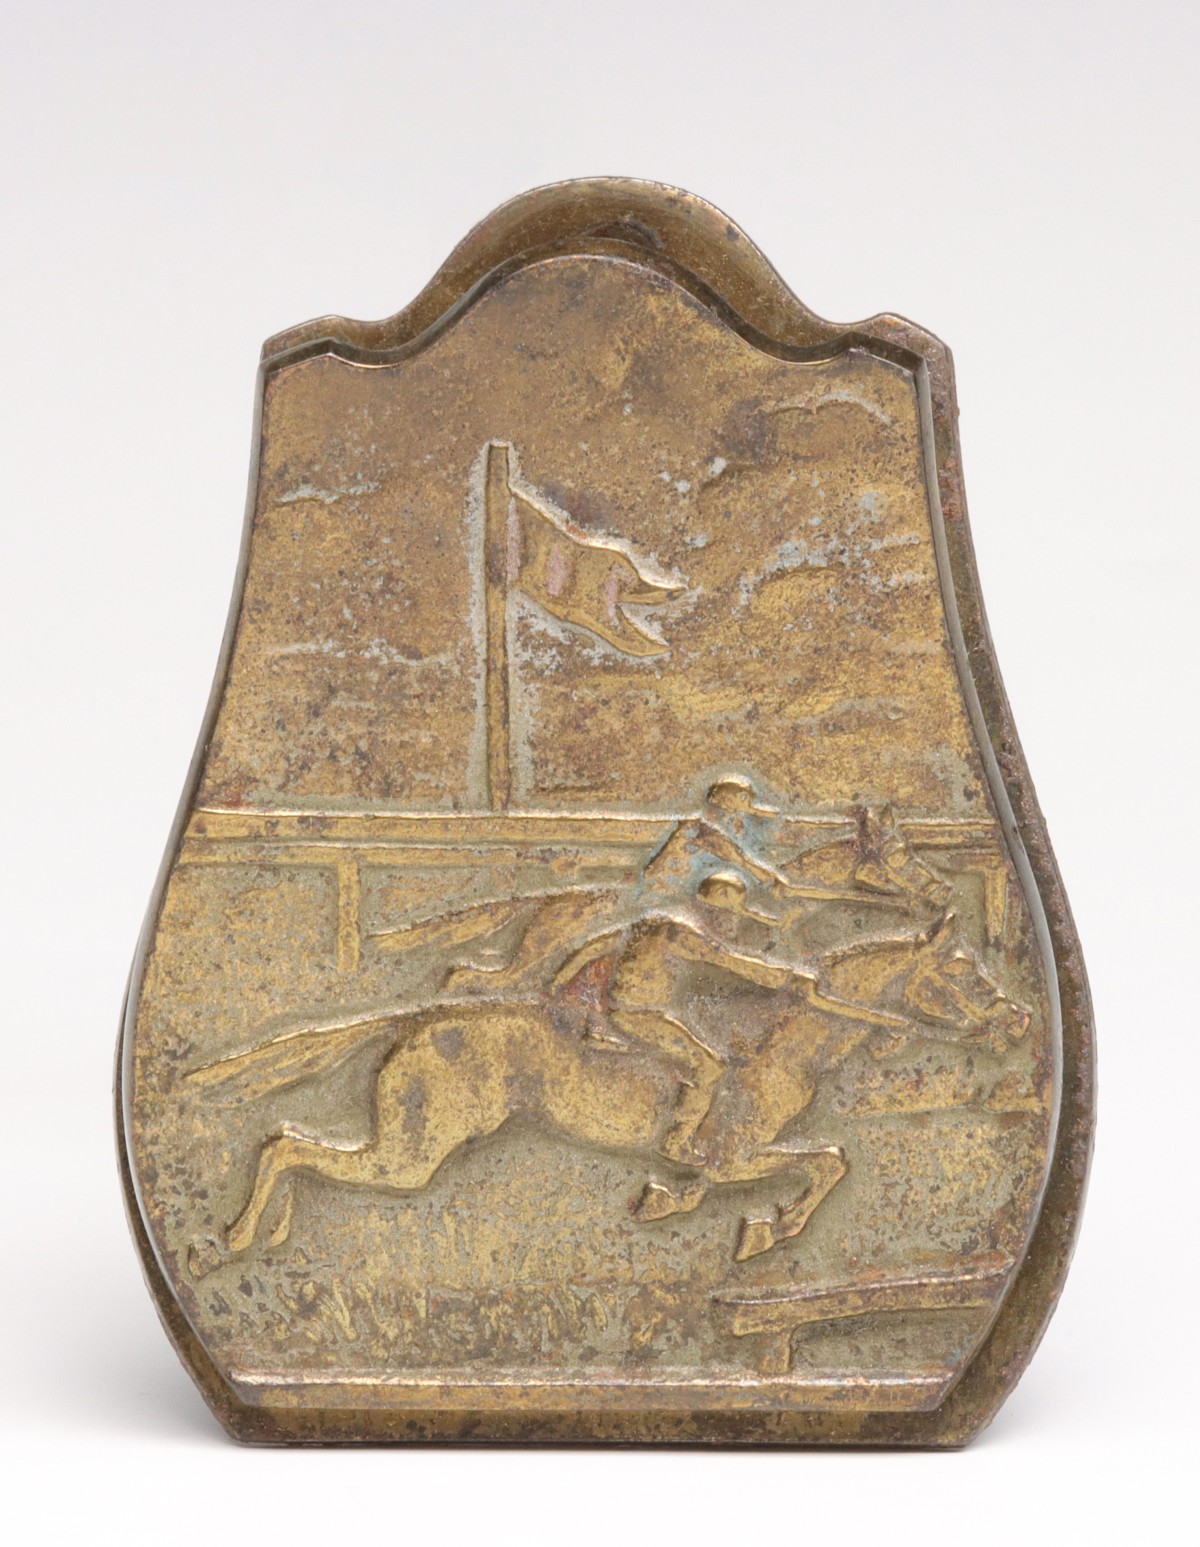 A CIRCA 1920s THOROUGHBRED RACE FIGURAL LETTER CLIP